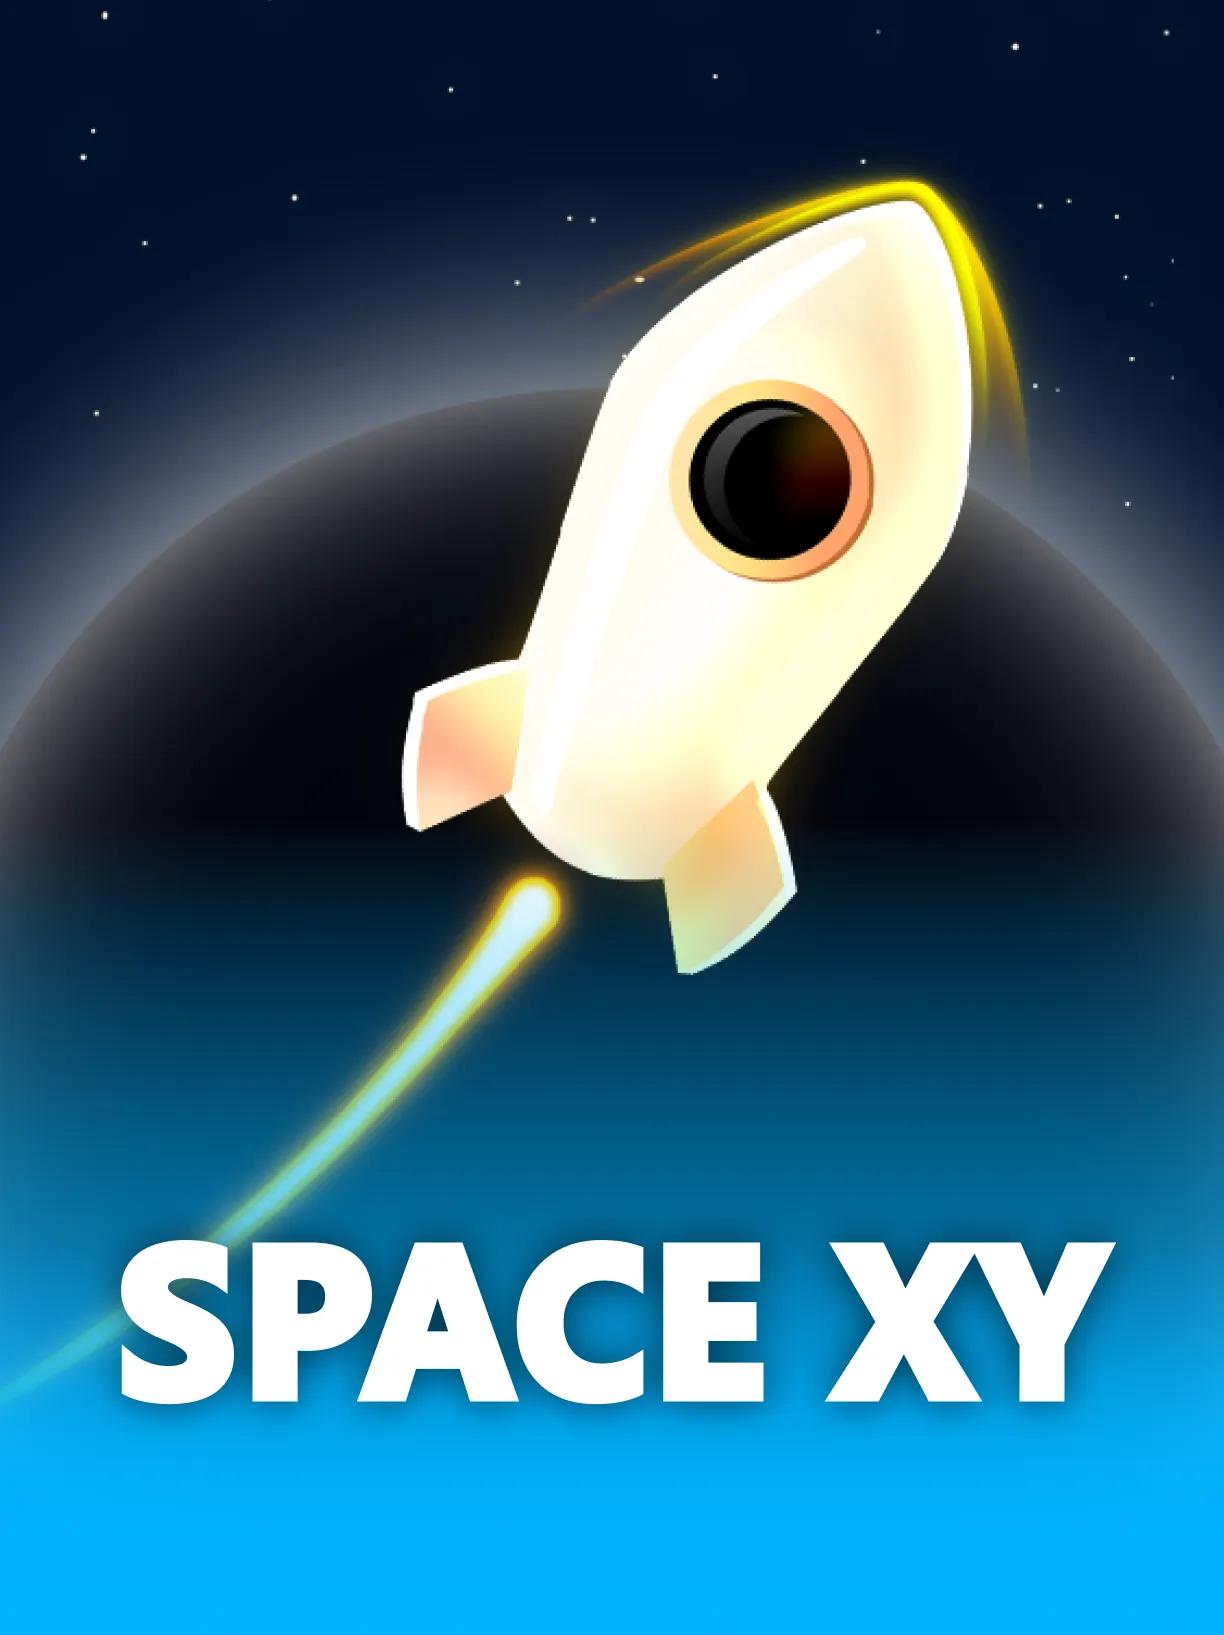 Space XY